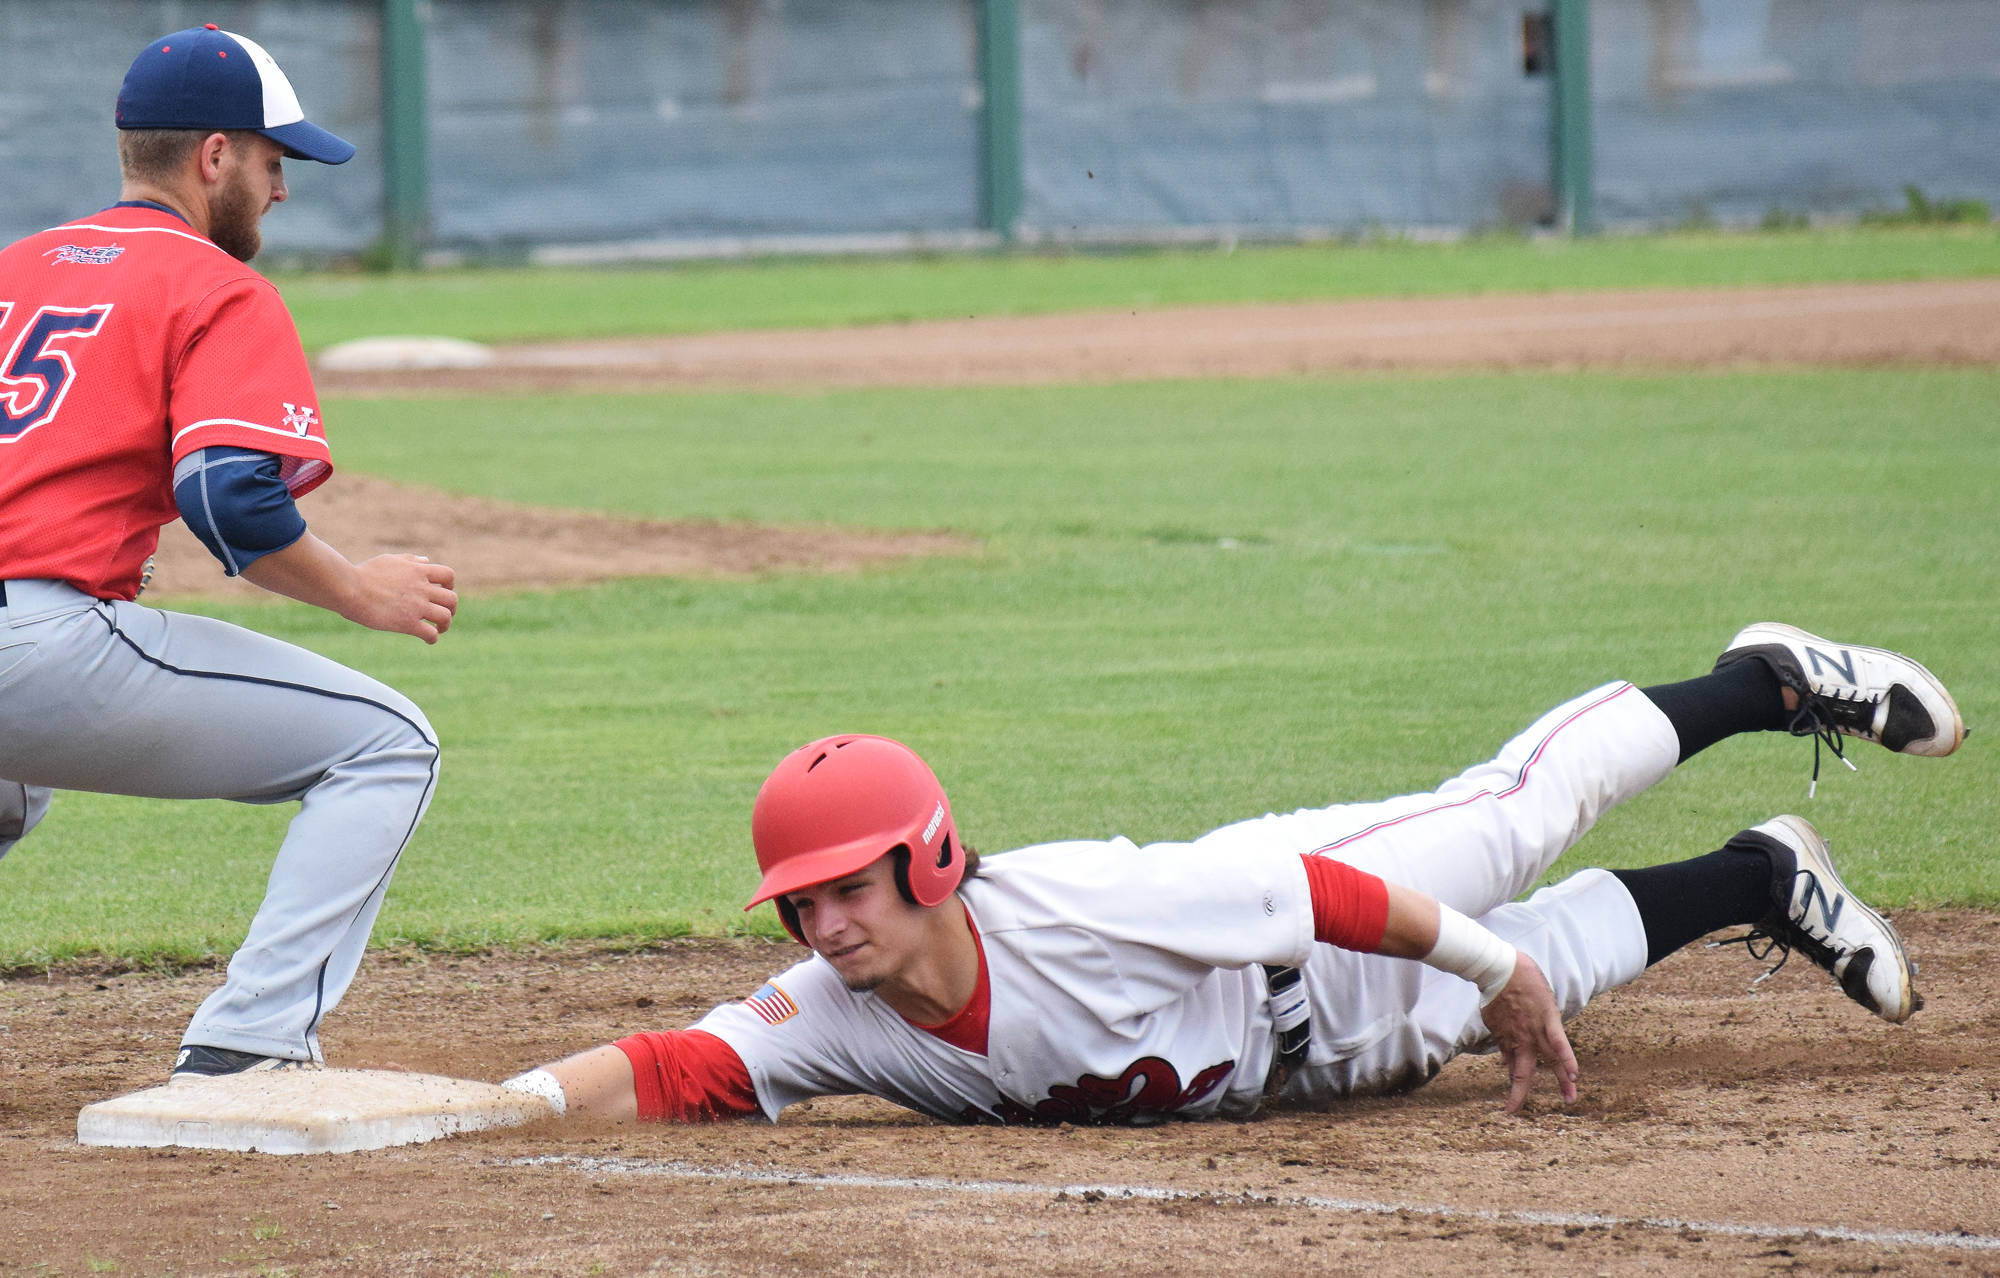 Peninsula Oilers baserunner Jack Bauer tags up to first base under the glove of Adam Rojas, Friday against the Chugiak Chinooks at Coral Seymour Memorial Ballpark in Kenai. (Photo by Joey Klecka/Peninsula Clarion)